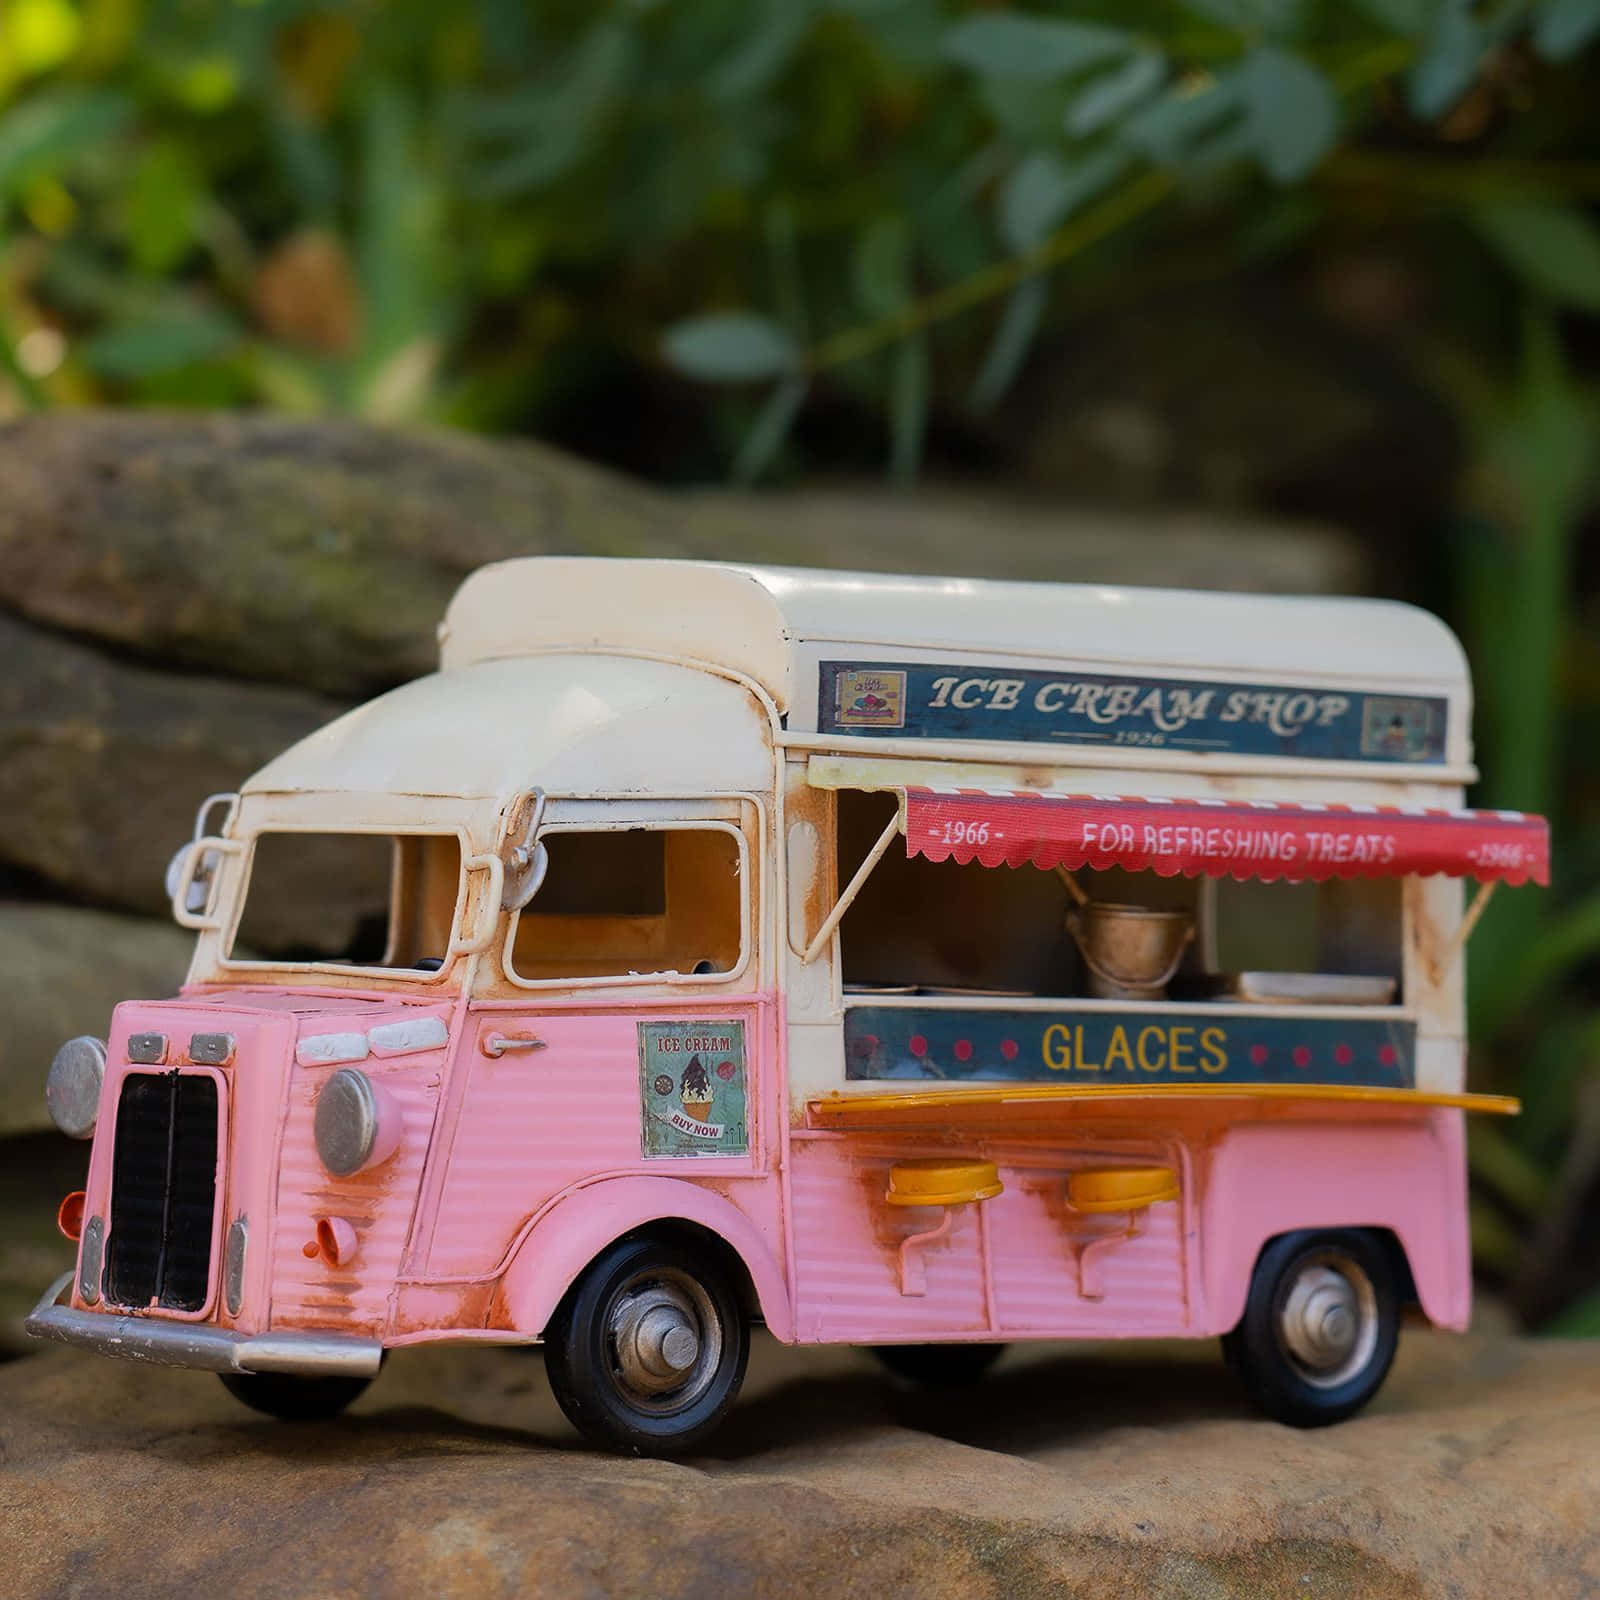 Cool off with an Ice Cream Truck Treat